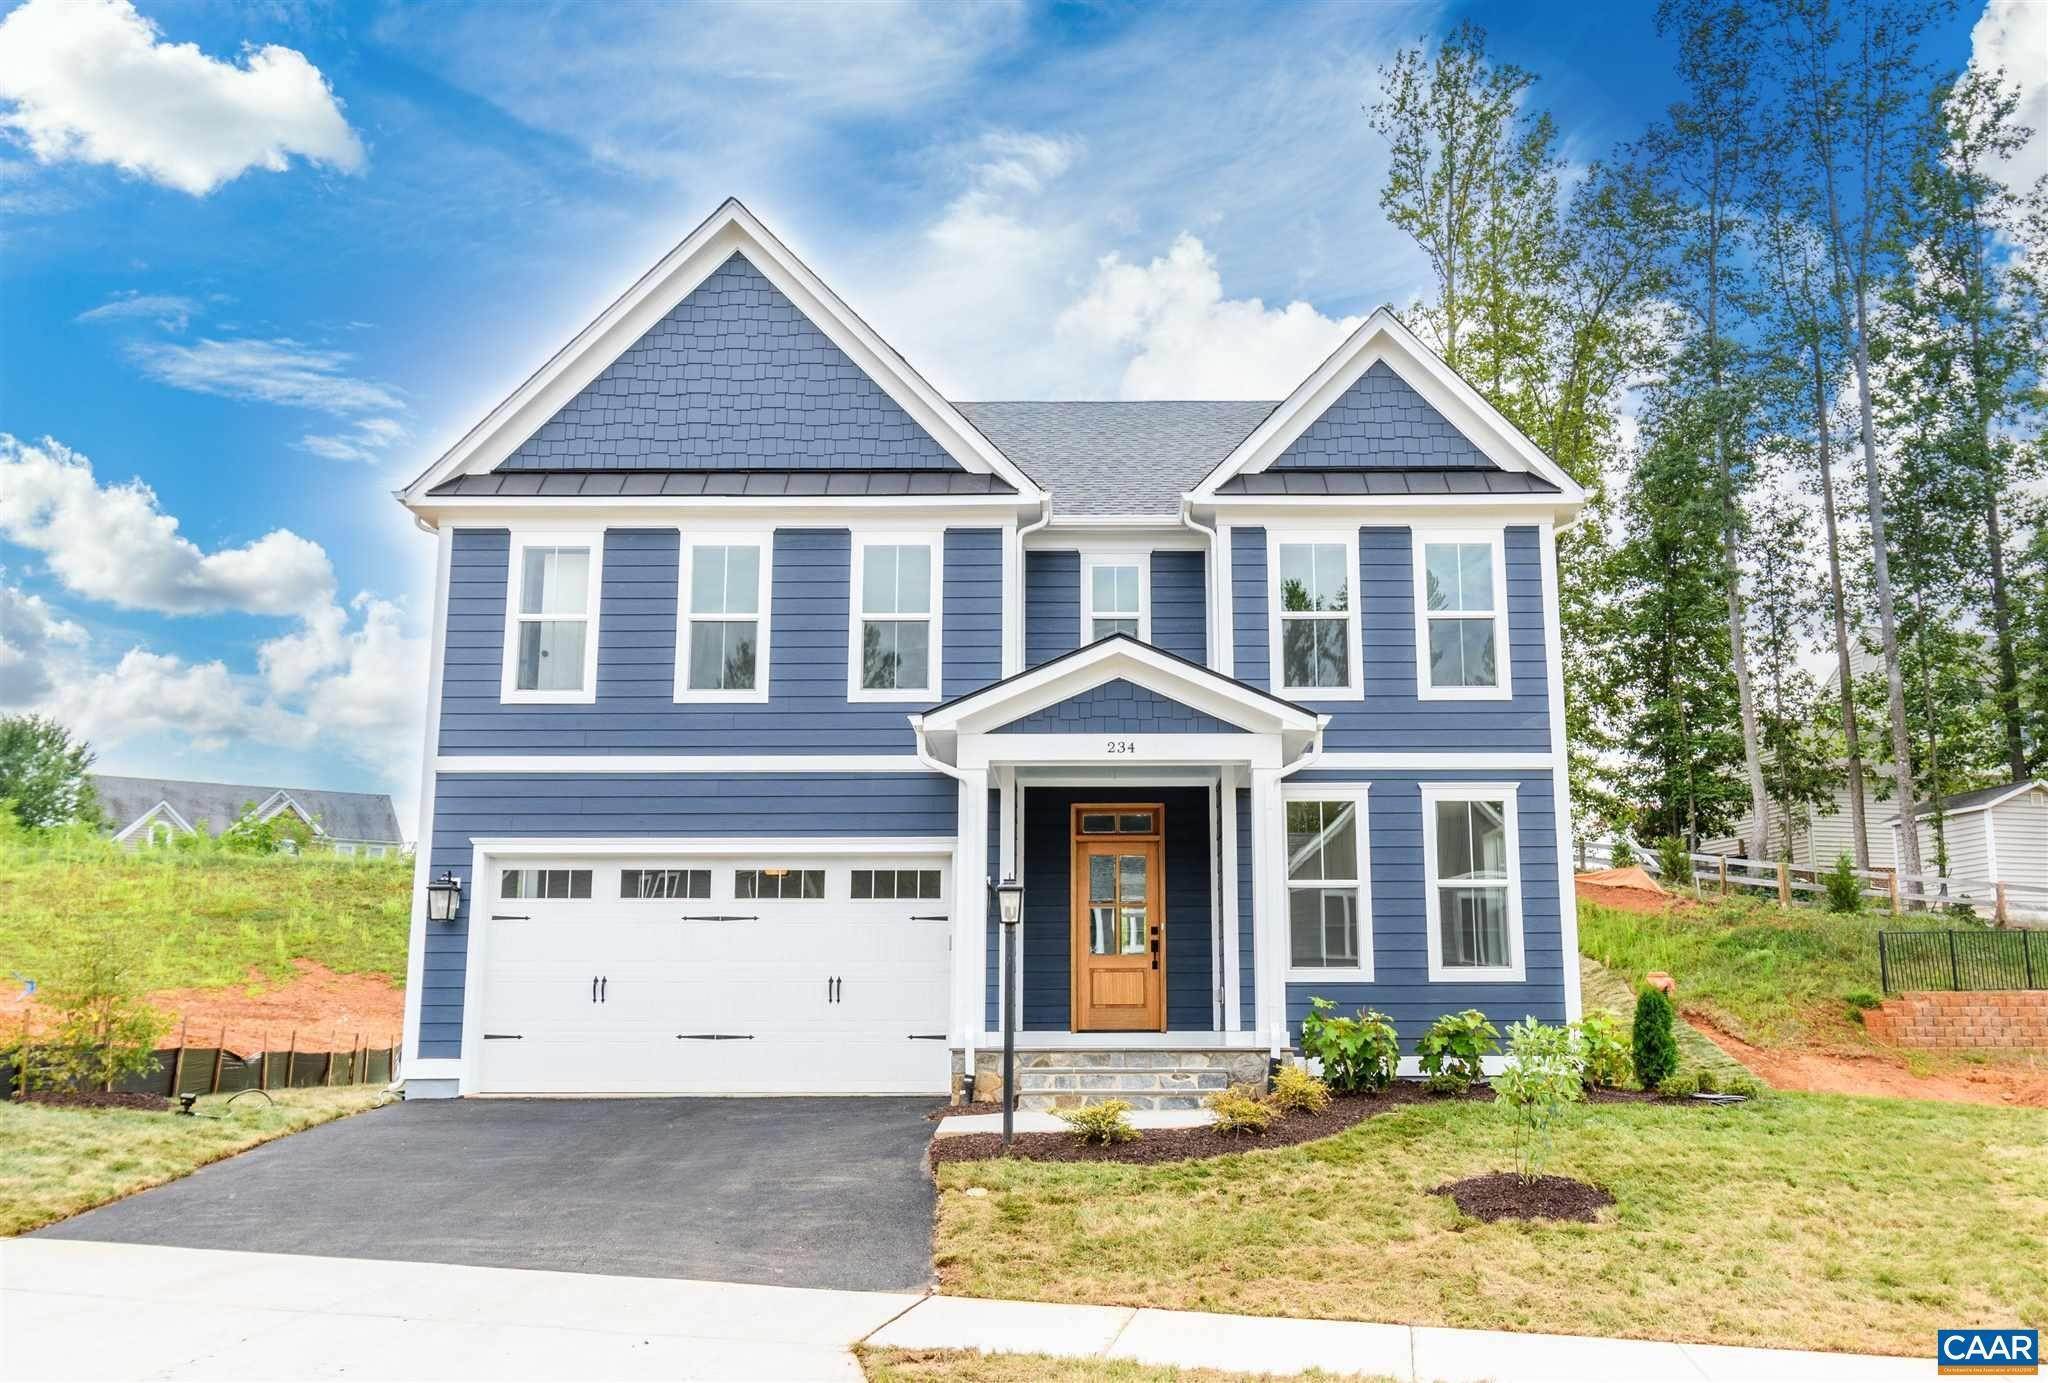 Single Family Homes for Sale at H1-18C RED OAK Court Zion Crossroads, Virginia 22942 United States